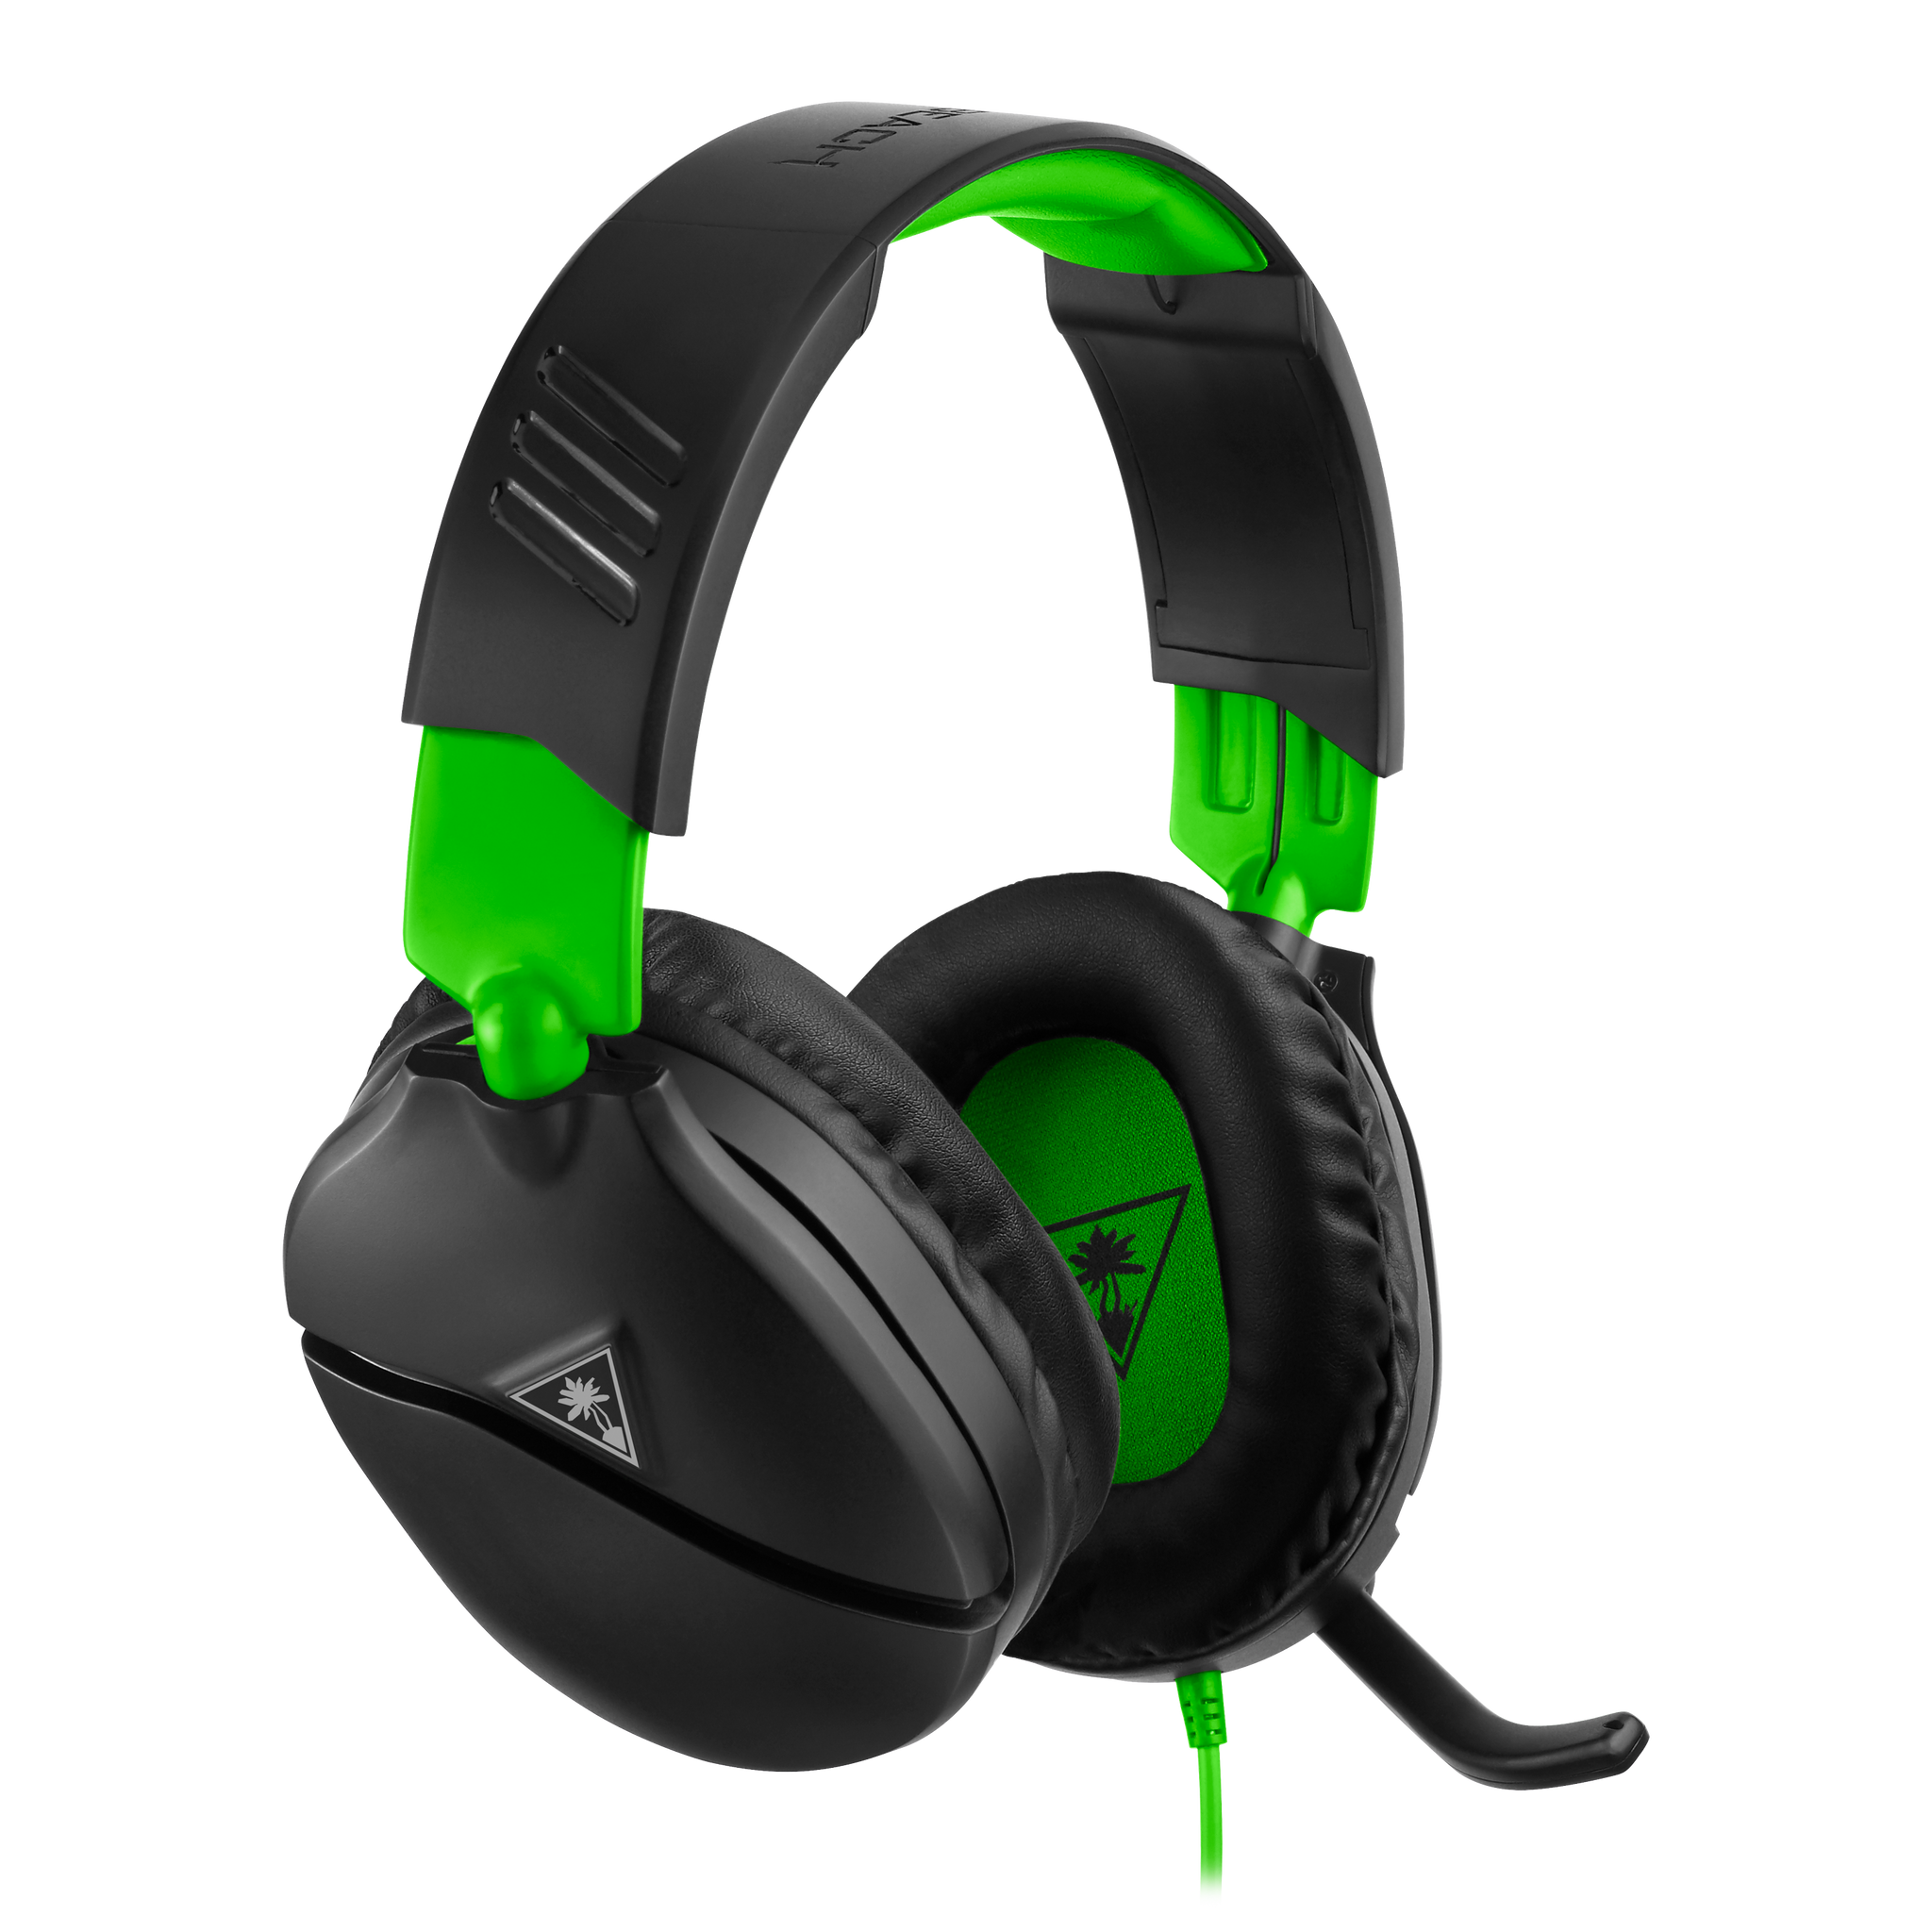 Recon 70 Headset for Xbox One